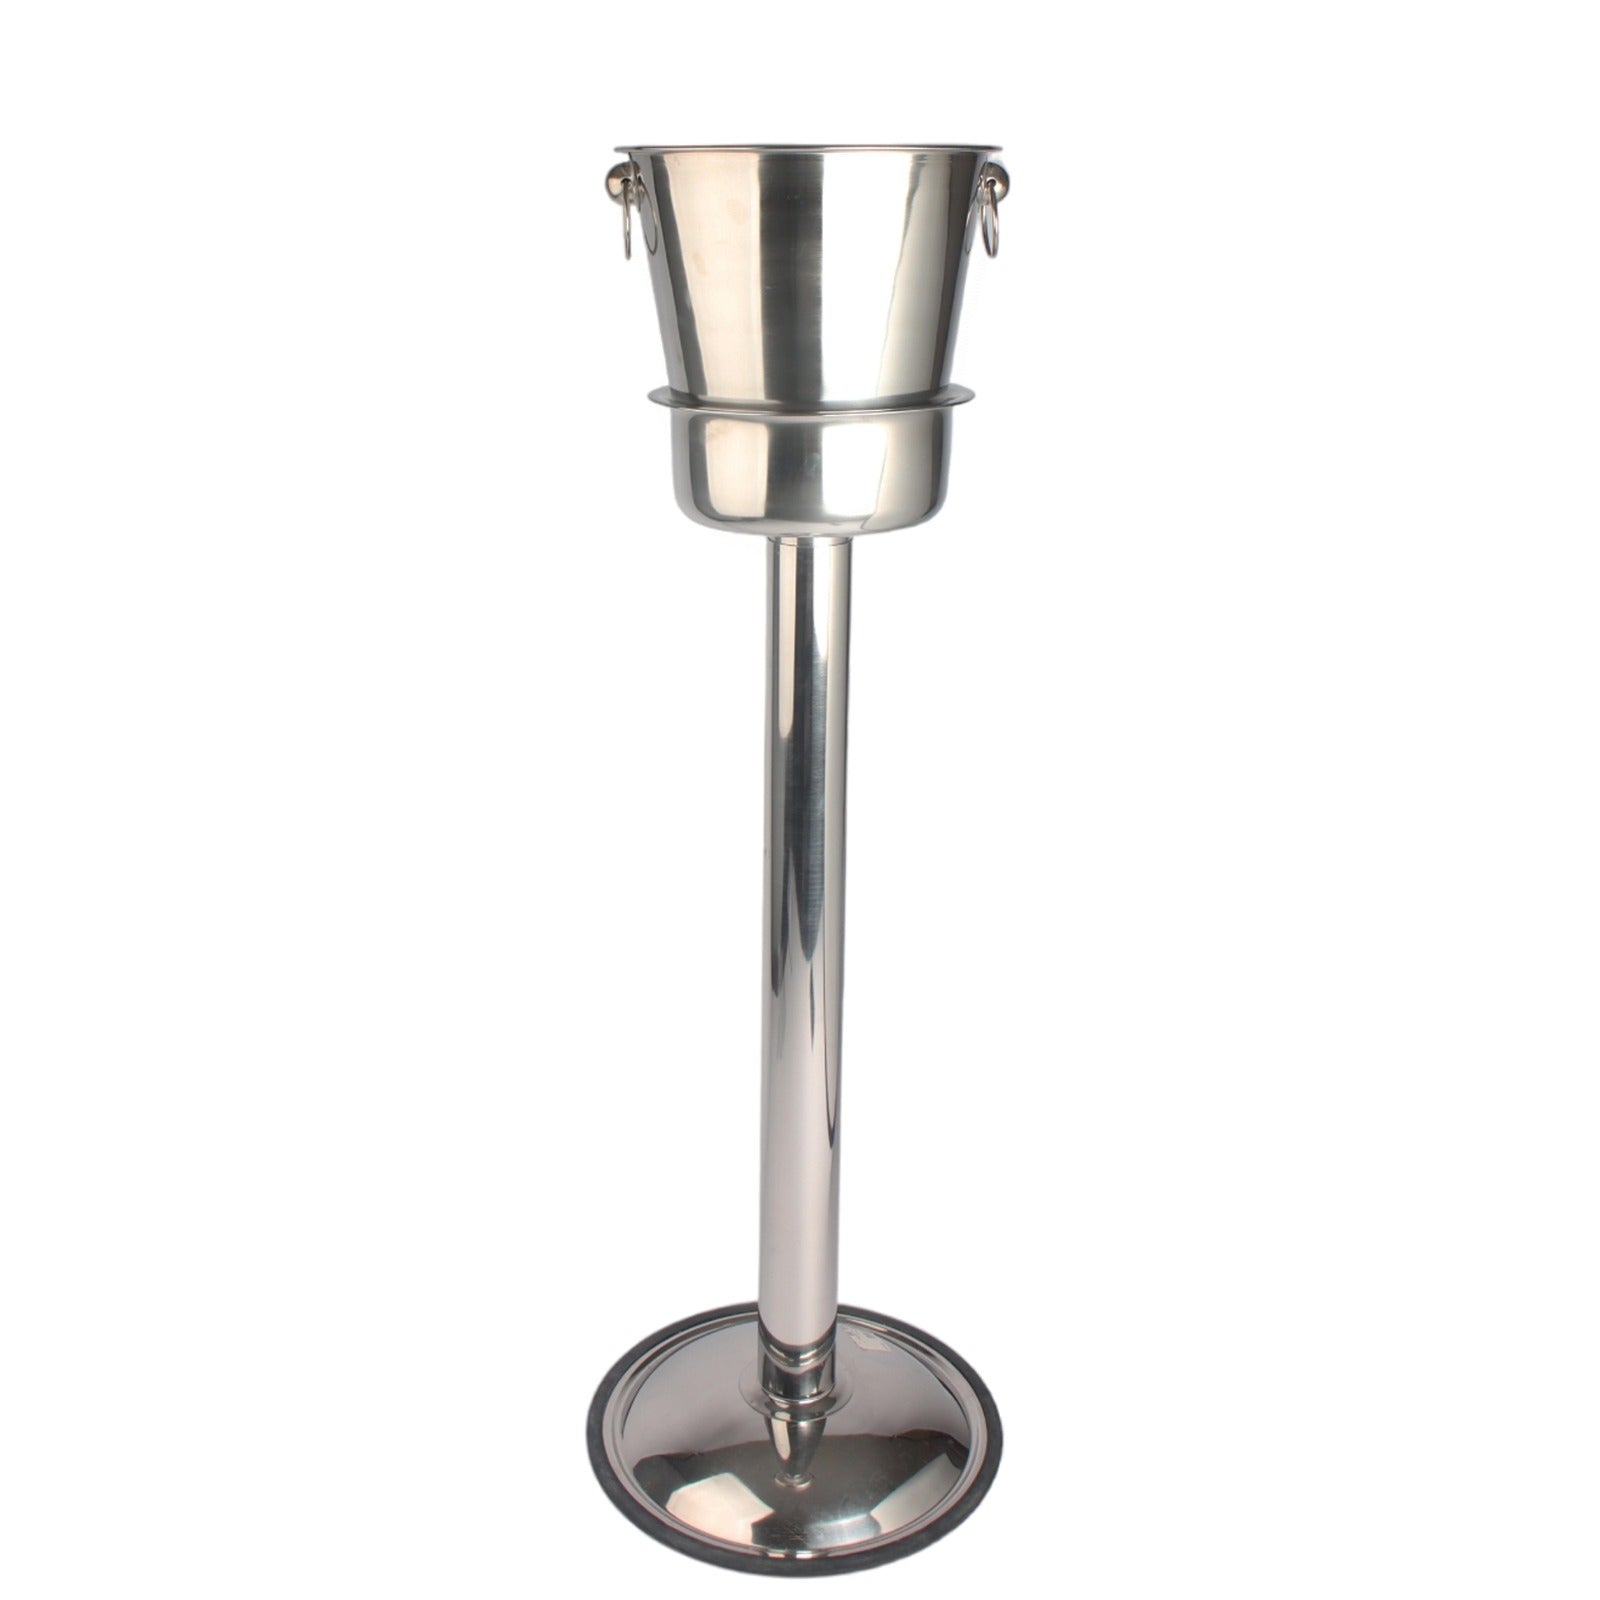 Stainless Steel Stand For Ice Bucket 64x17cm Premium